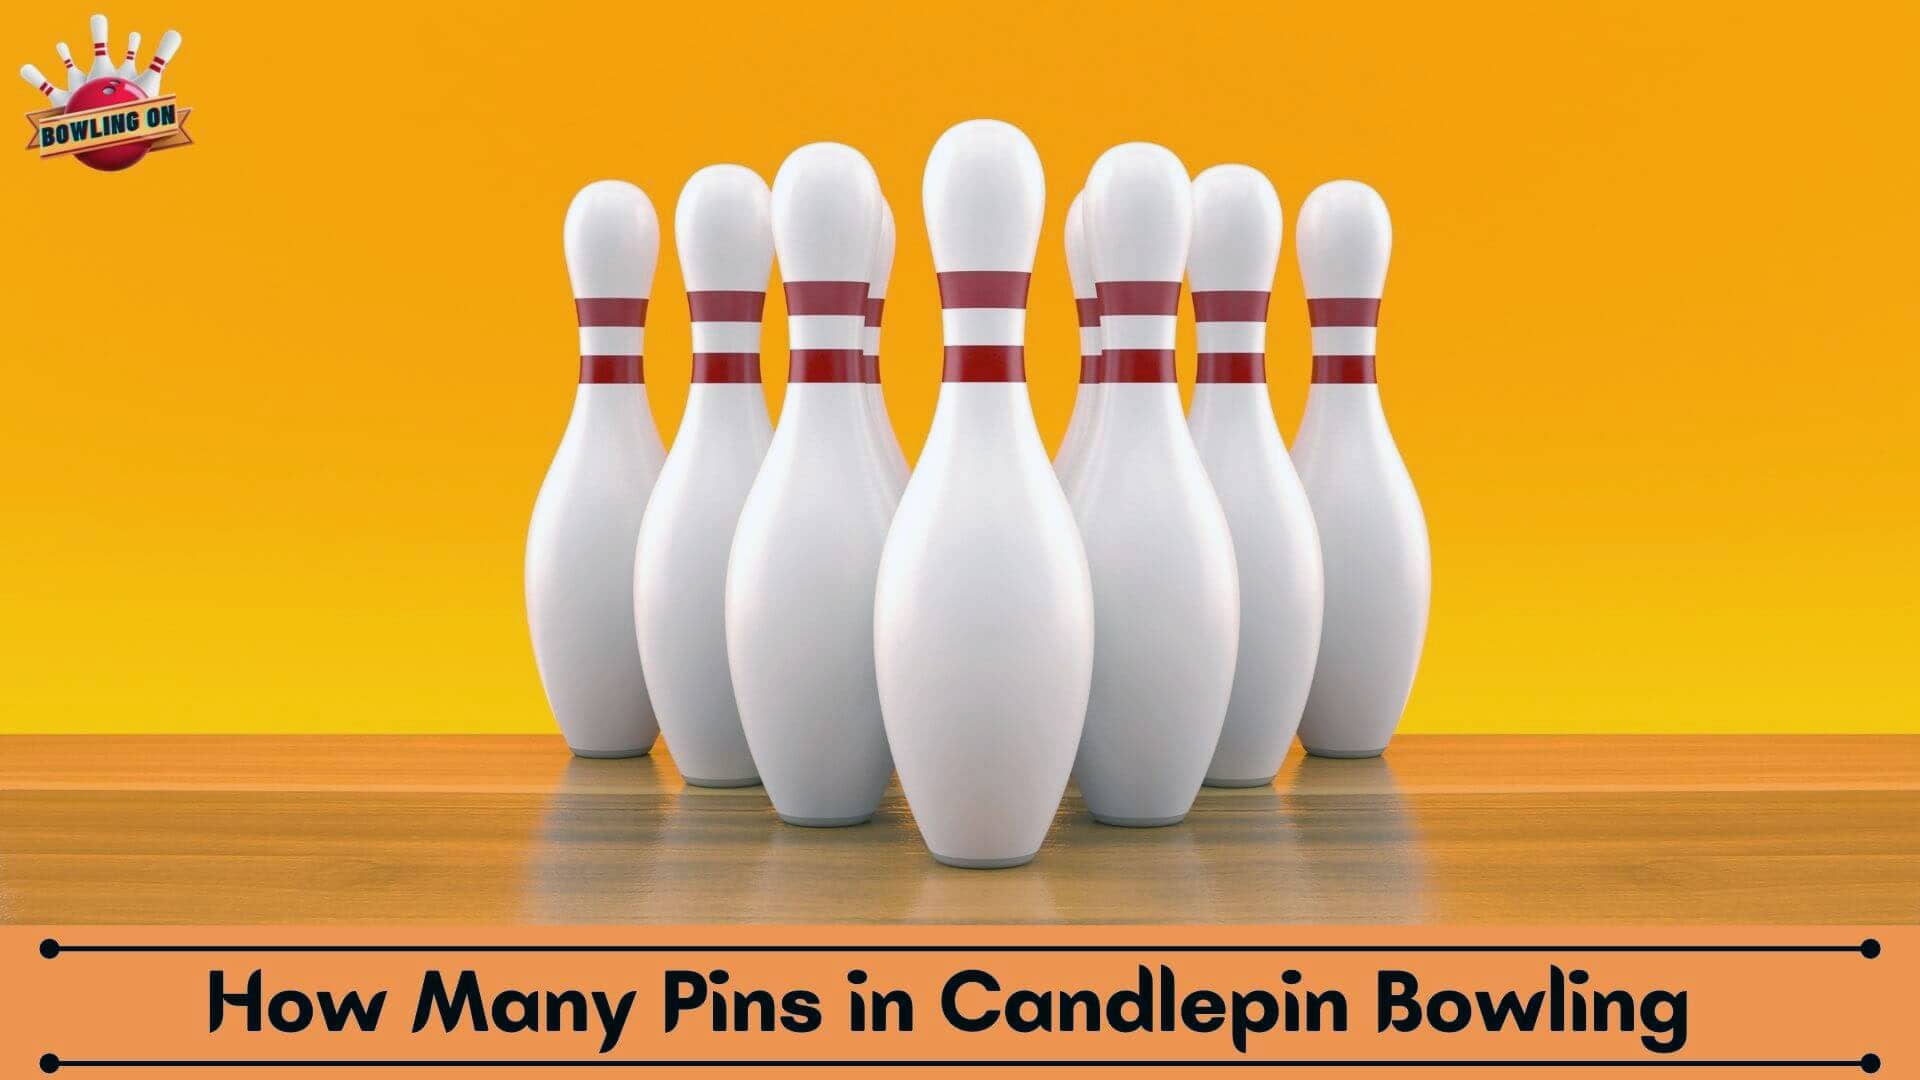 How Many Pins in Candlepin Bowling